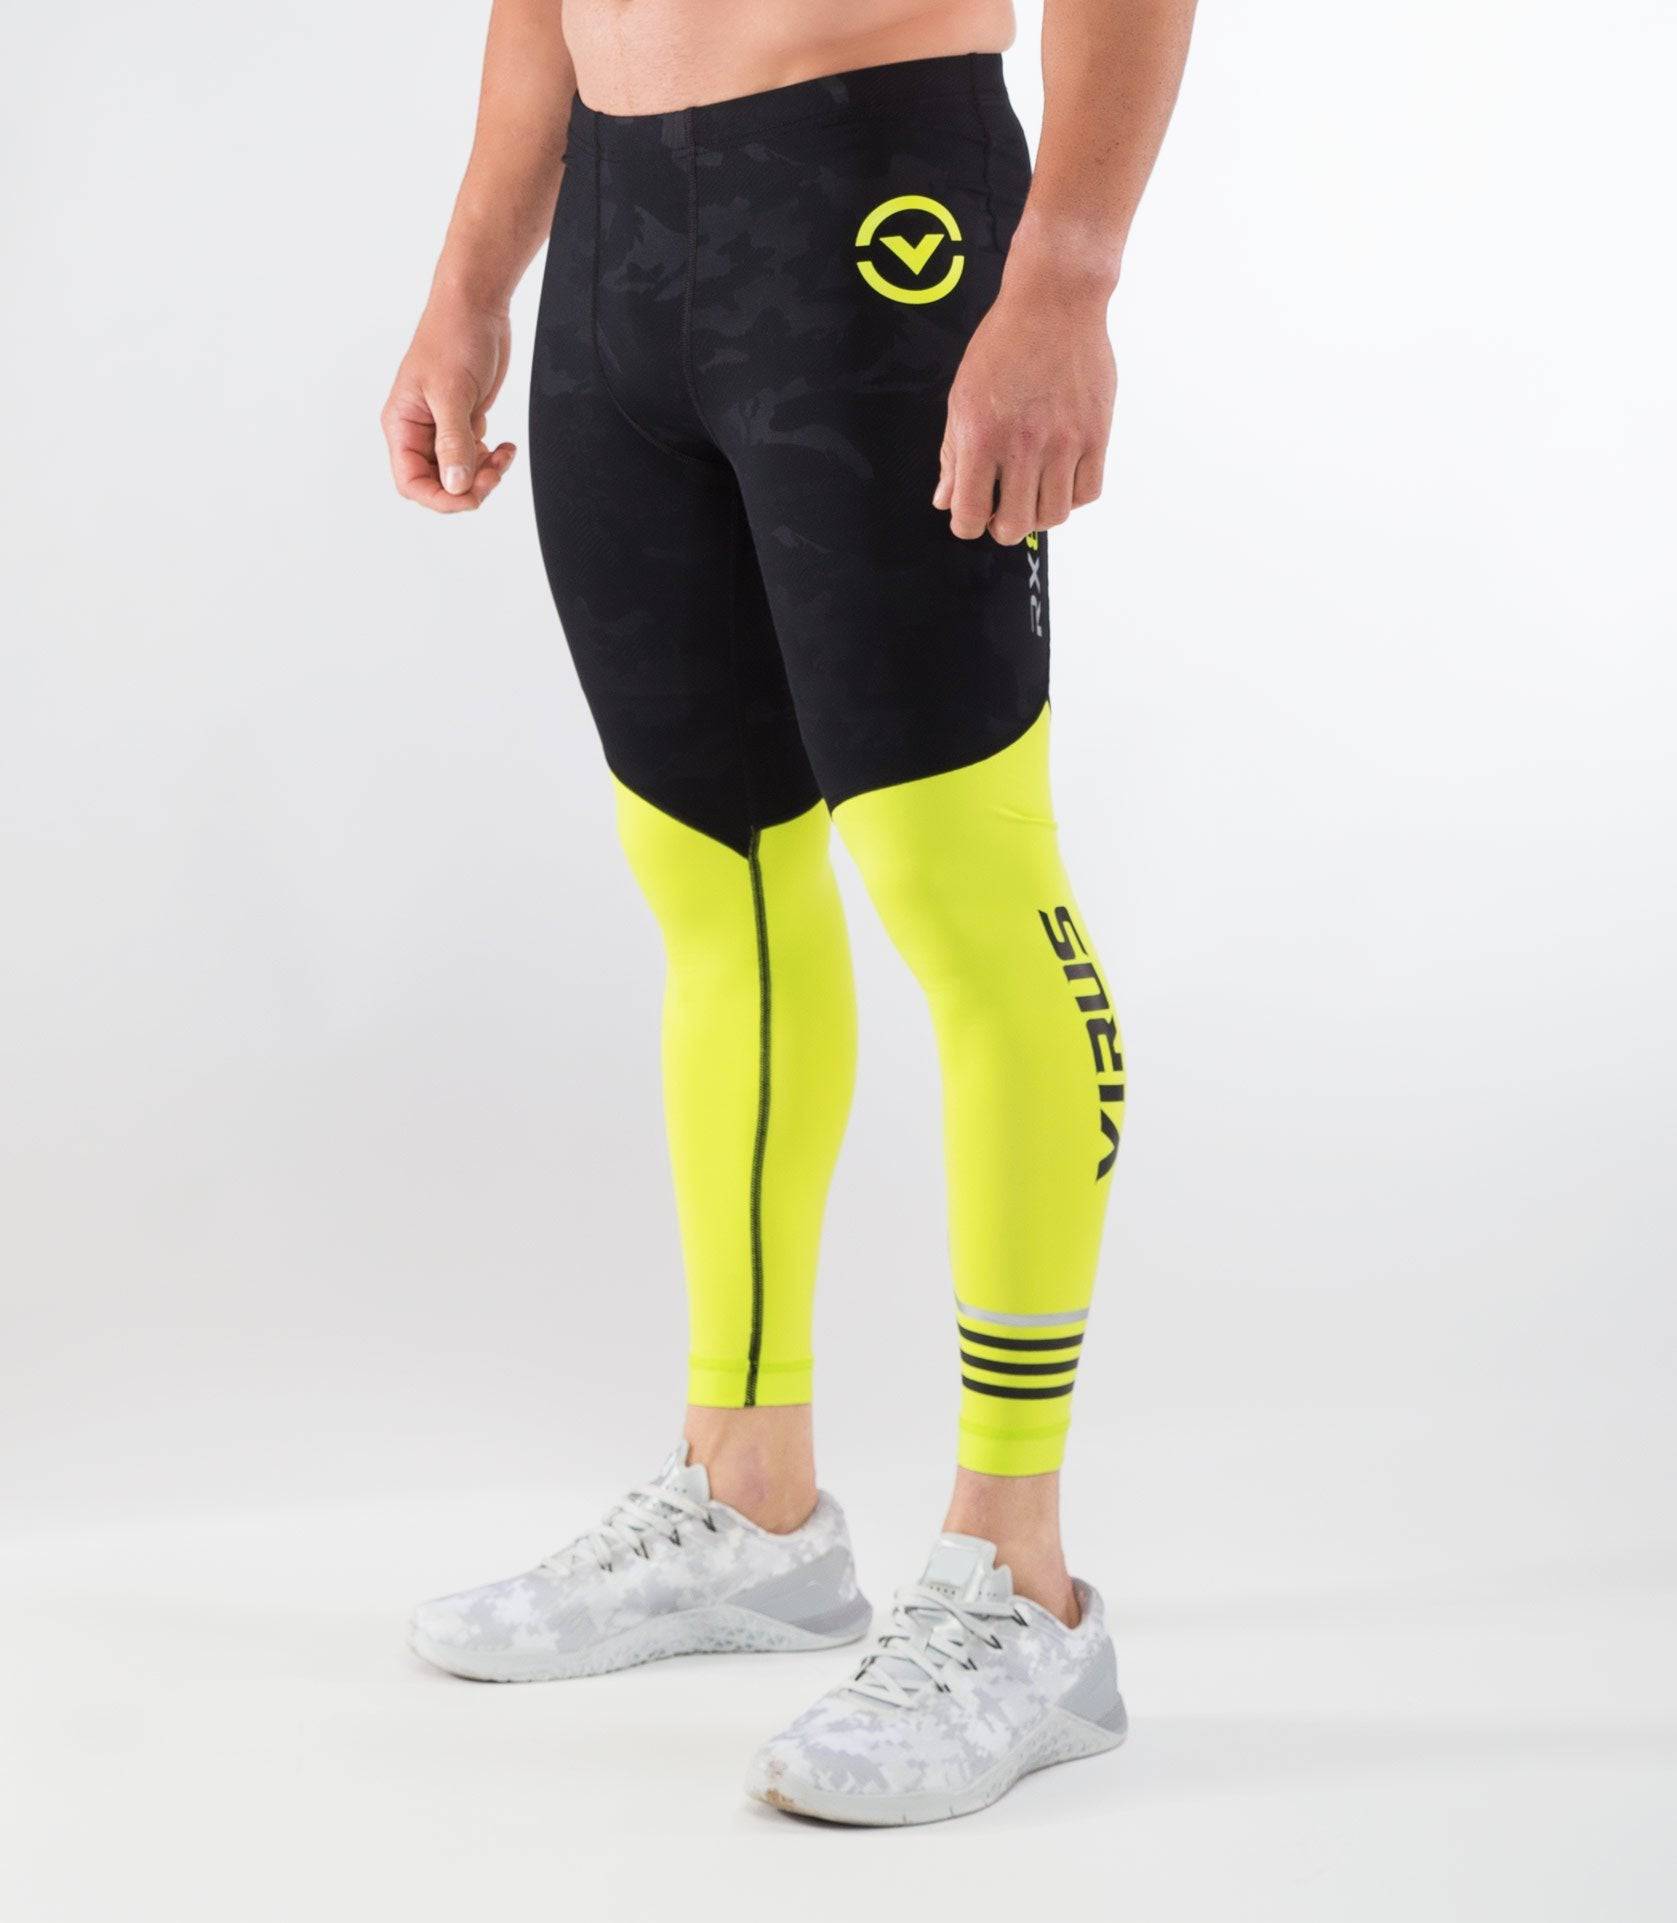 Gear Review: Virus International Compression Shirt/Pants and